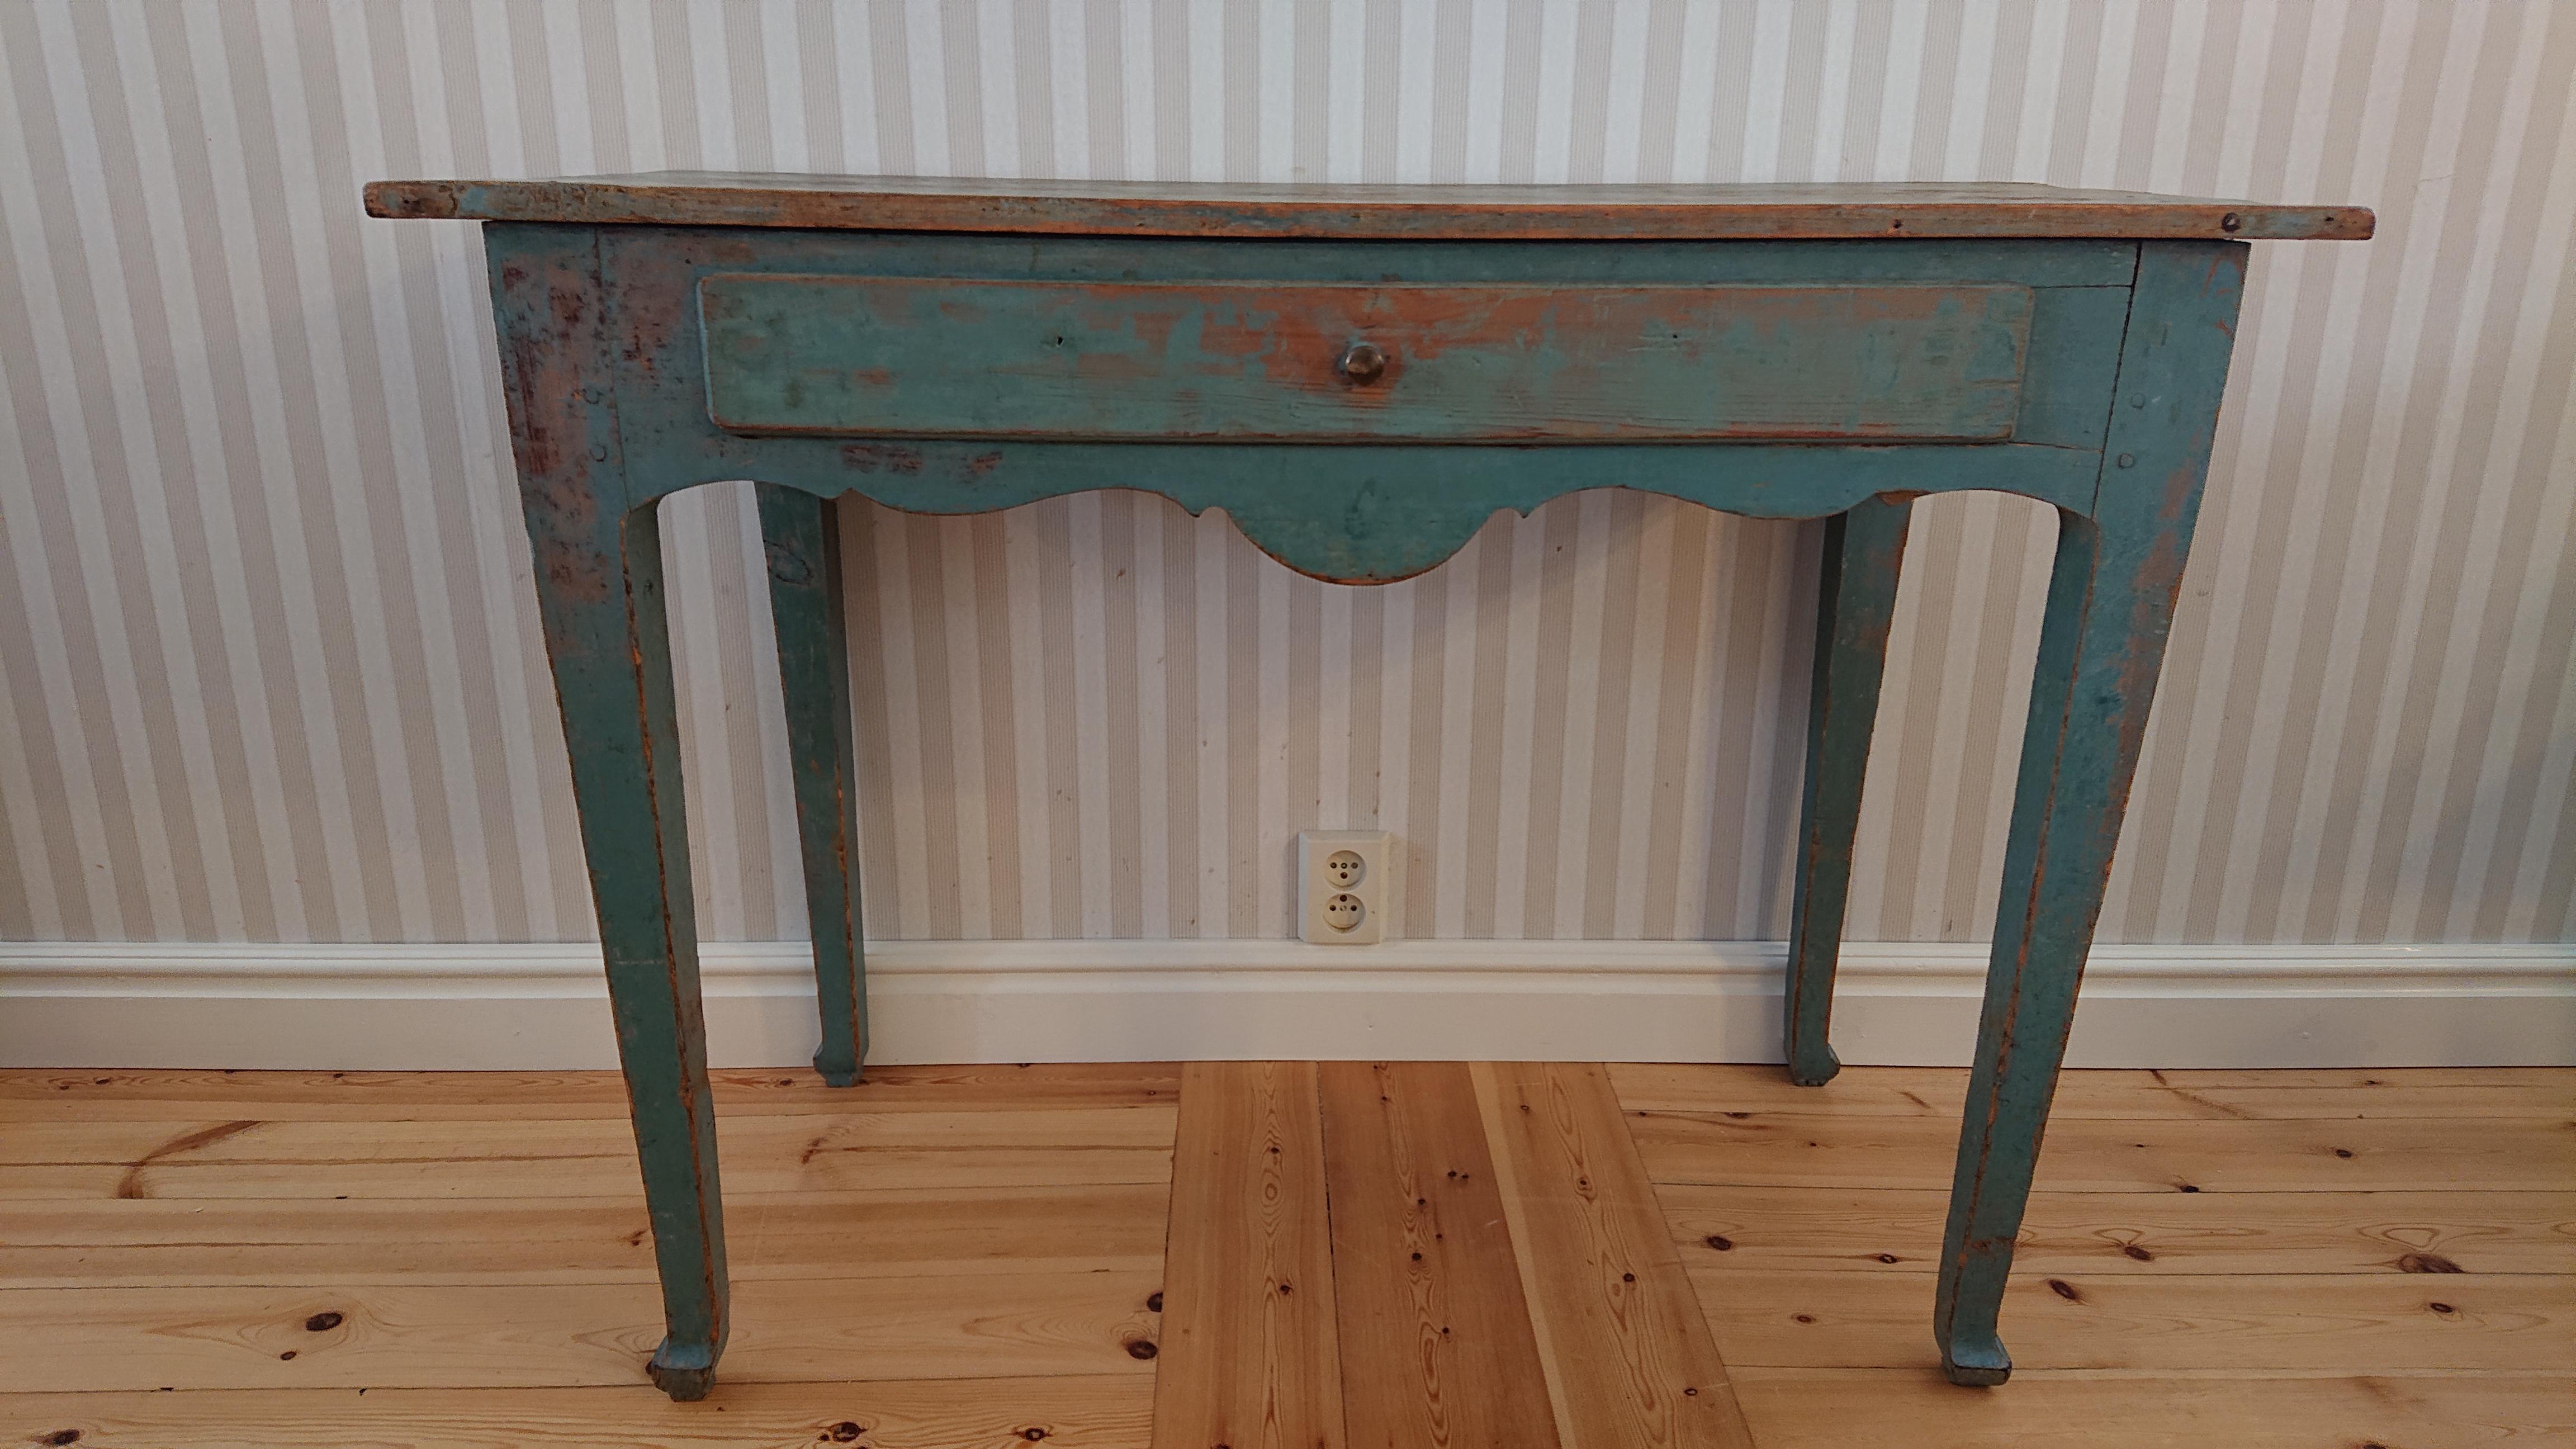 18th century Swedish rococo table/ desk from Boden Norrbotten, Northern Sweden.
Handscraped to its originalcolor.
An early rococo table / desk with features of late baroque.
Remains of decorative painting on the table top.
Beautiful original